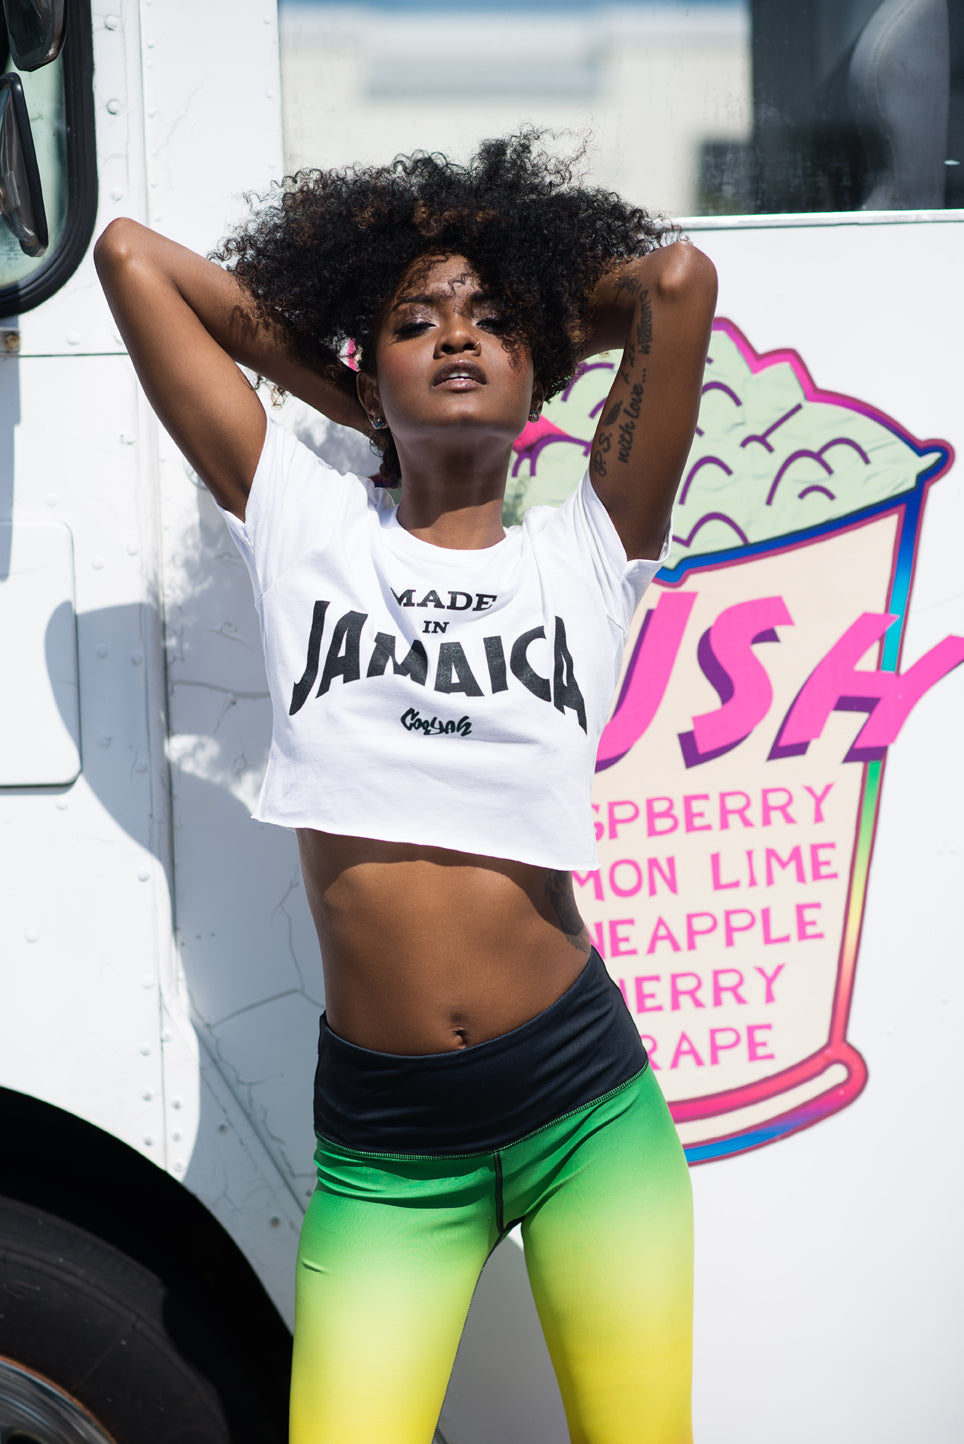 Cooyah Clothing. Made in Jamaica women's white crop top graphic tee with black screen print. Ringspun cotton, short sleeve, crew neck t-shirt. Jamaican clothing brand.